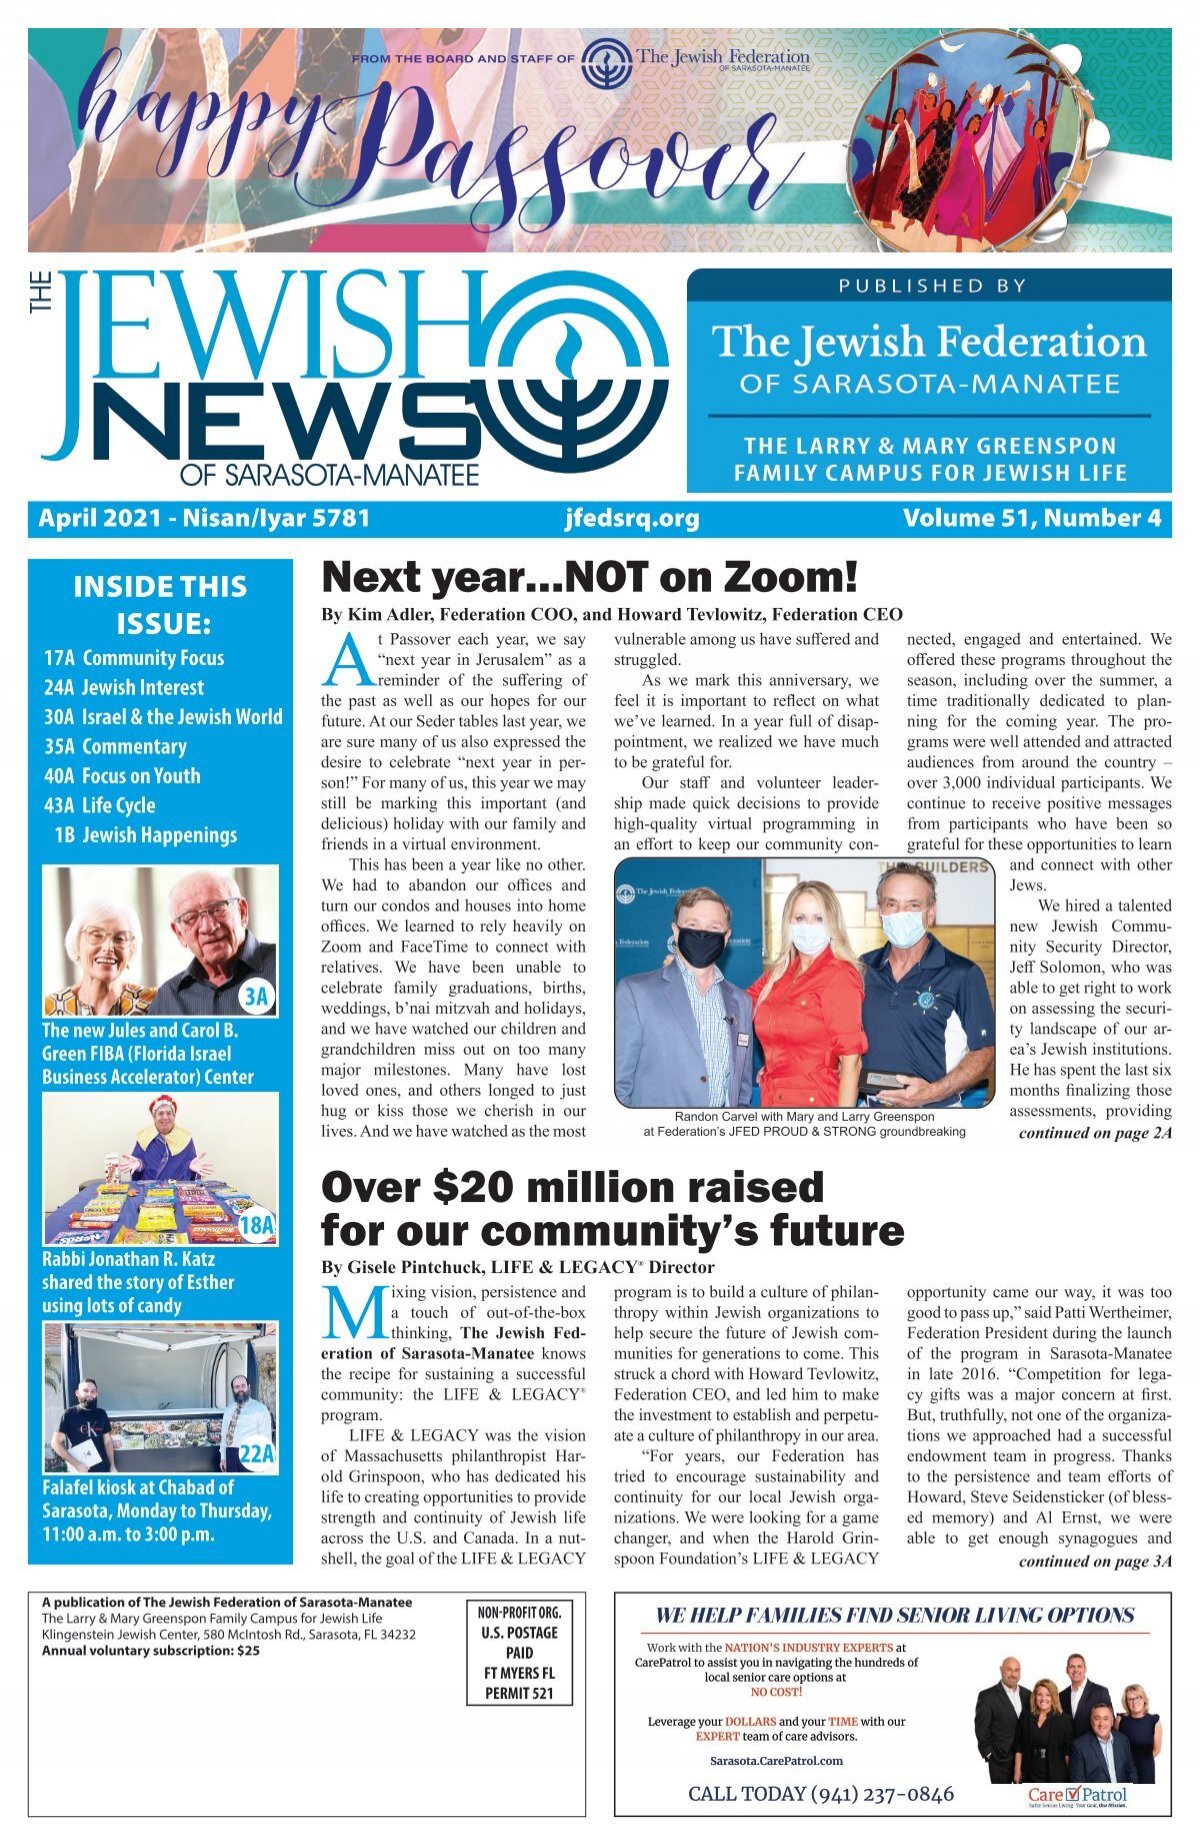 Unions pitch in to help National Council of Jewish Women distribute school  supplies, clothing to 1,300 kids in need - The Labor Tribune